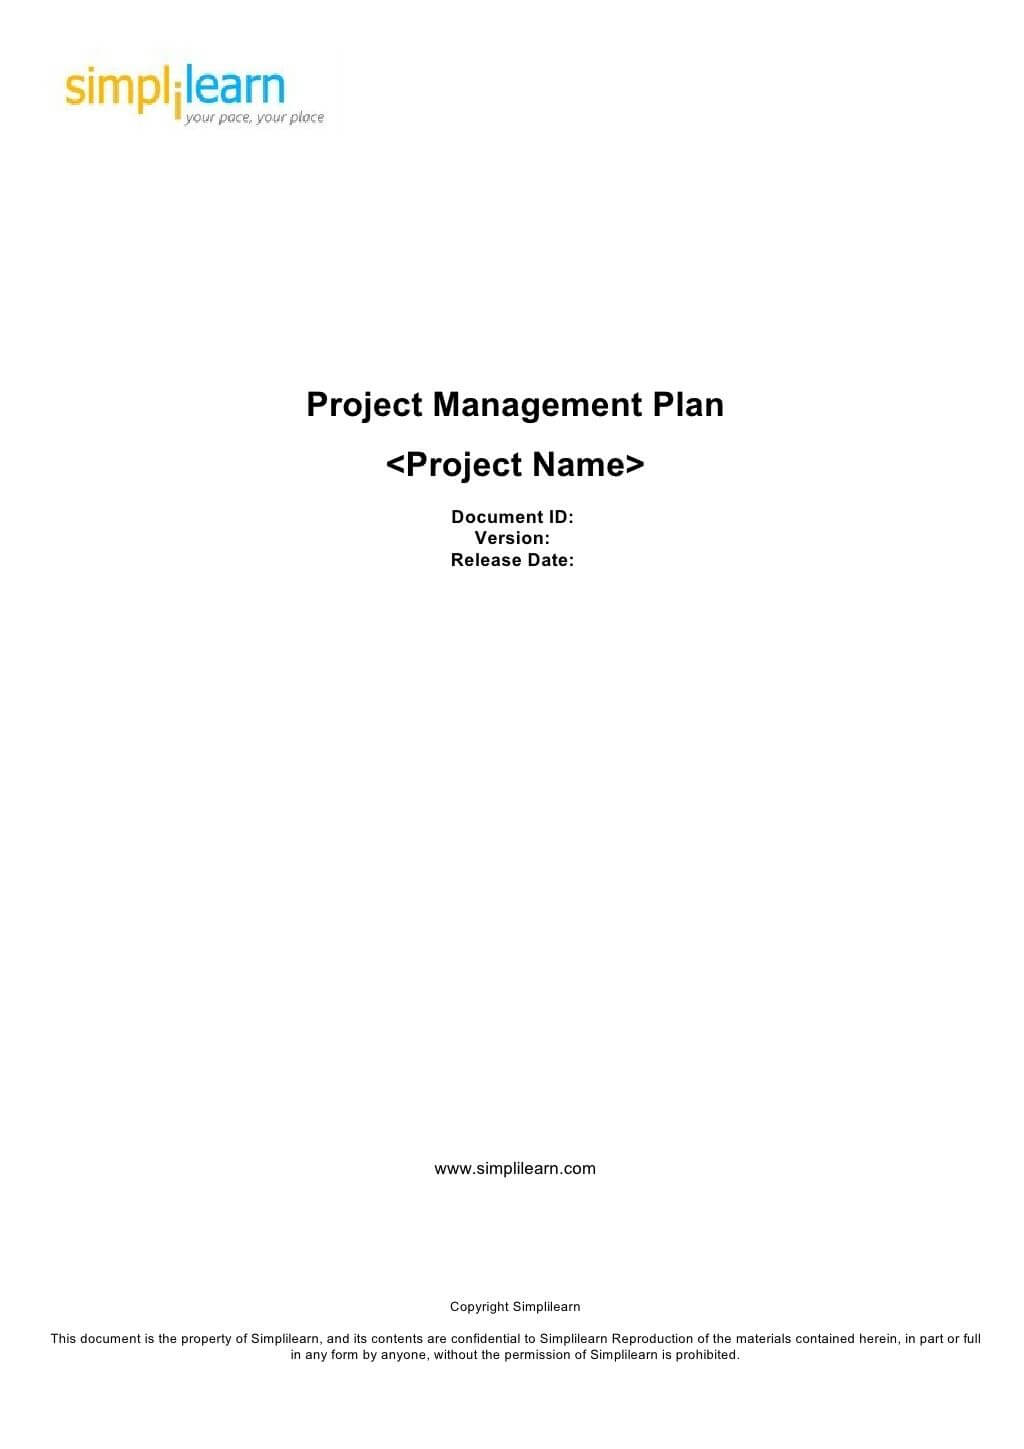 Project Management Plan Template | Project Management For Cover Page ...